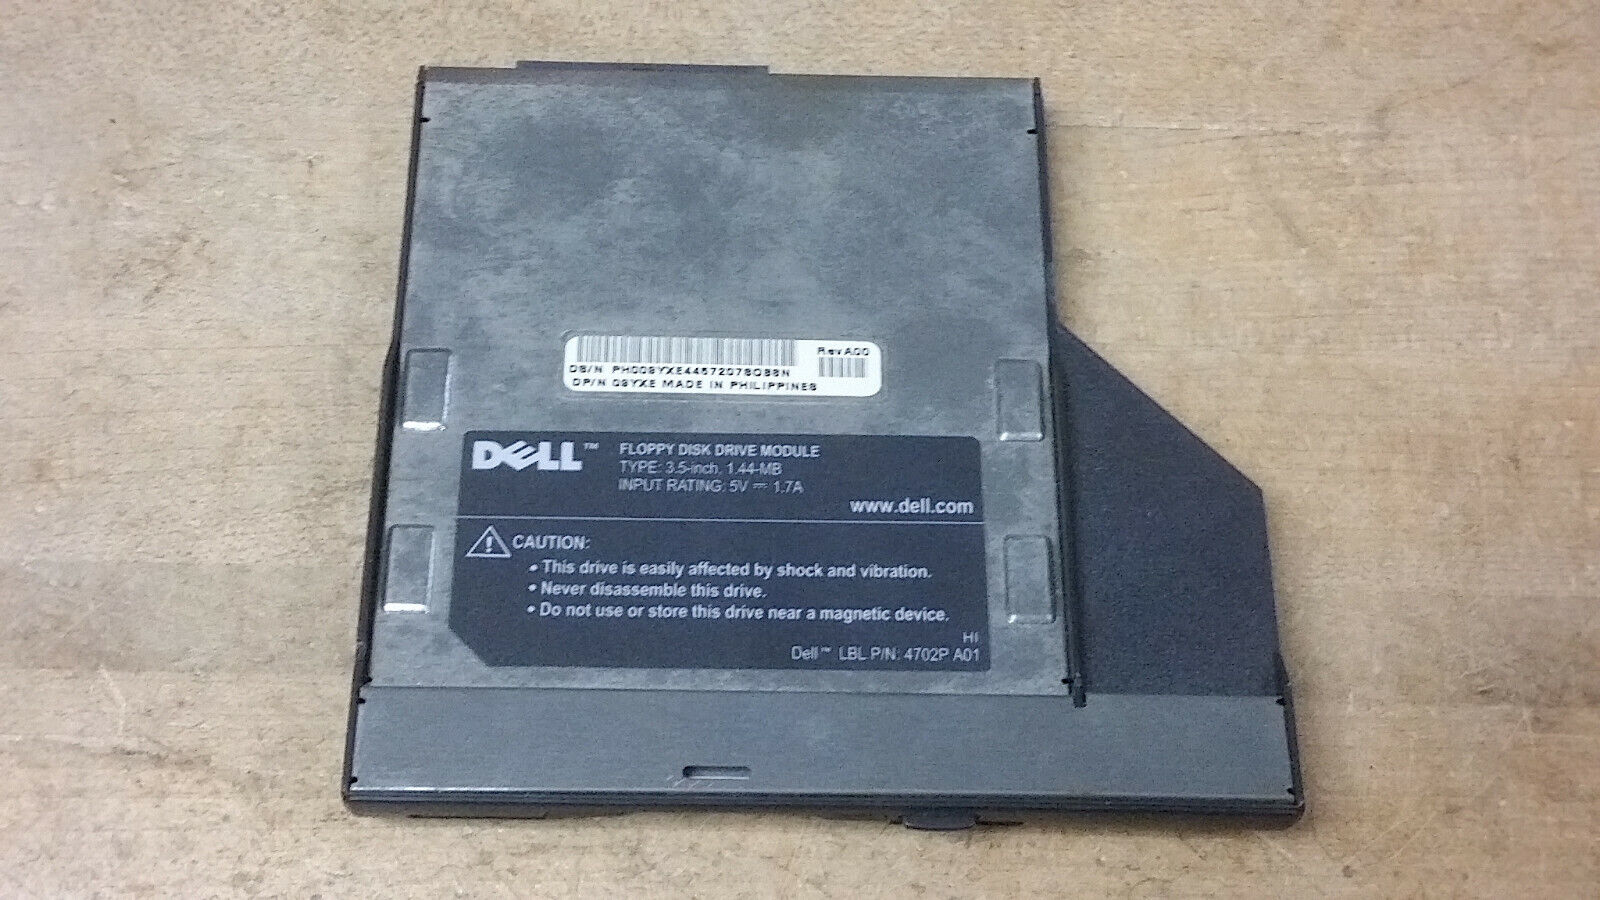 Dell Laptop 1.44 MB 3 1/2 inch Flopy Drive Module f/ Old Vintage Laptop Computer